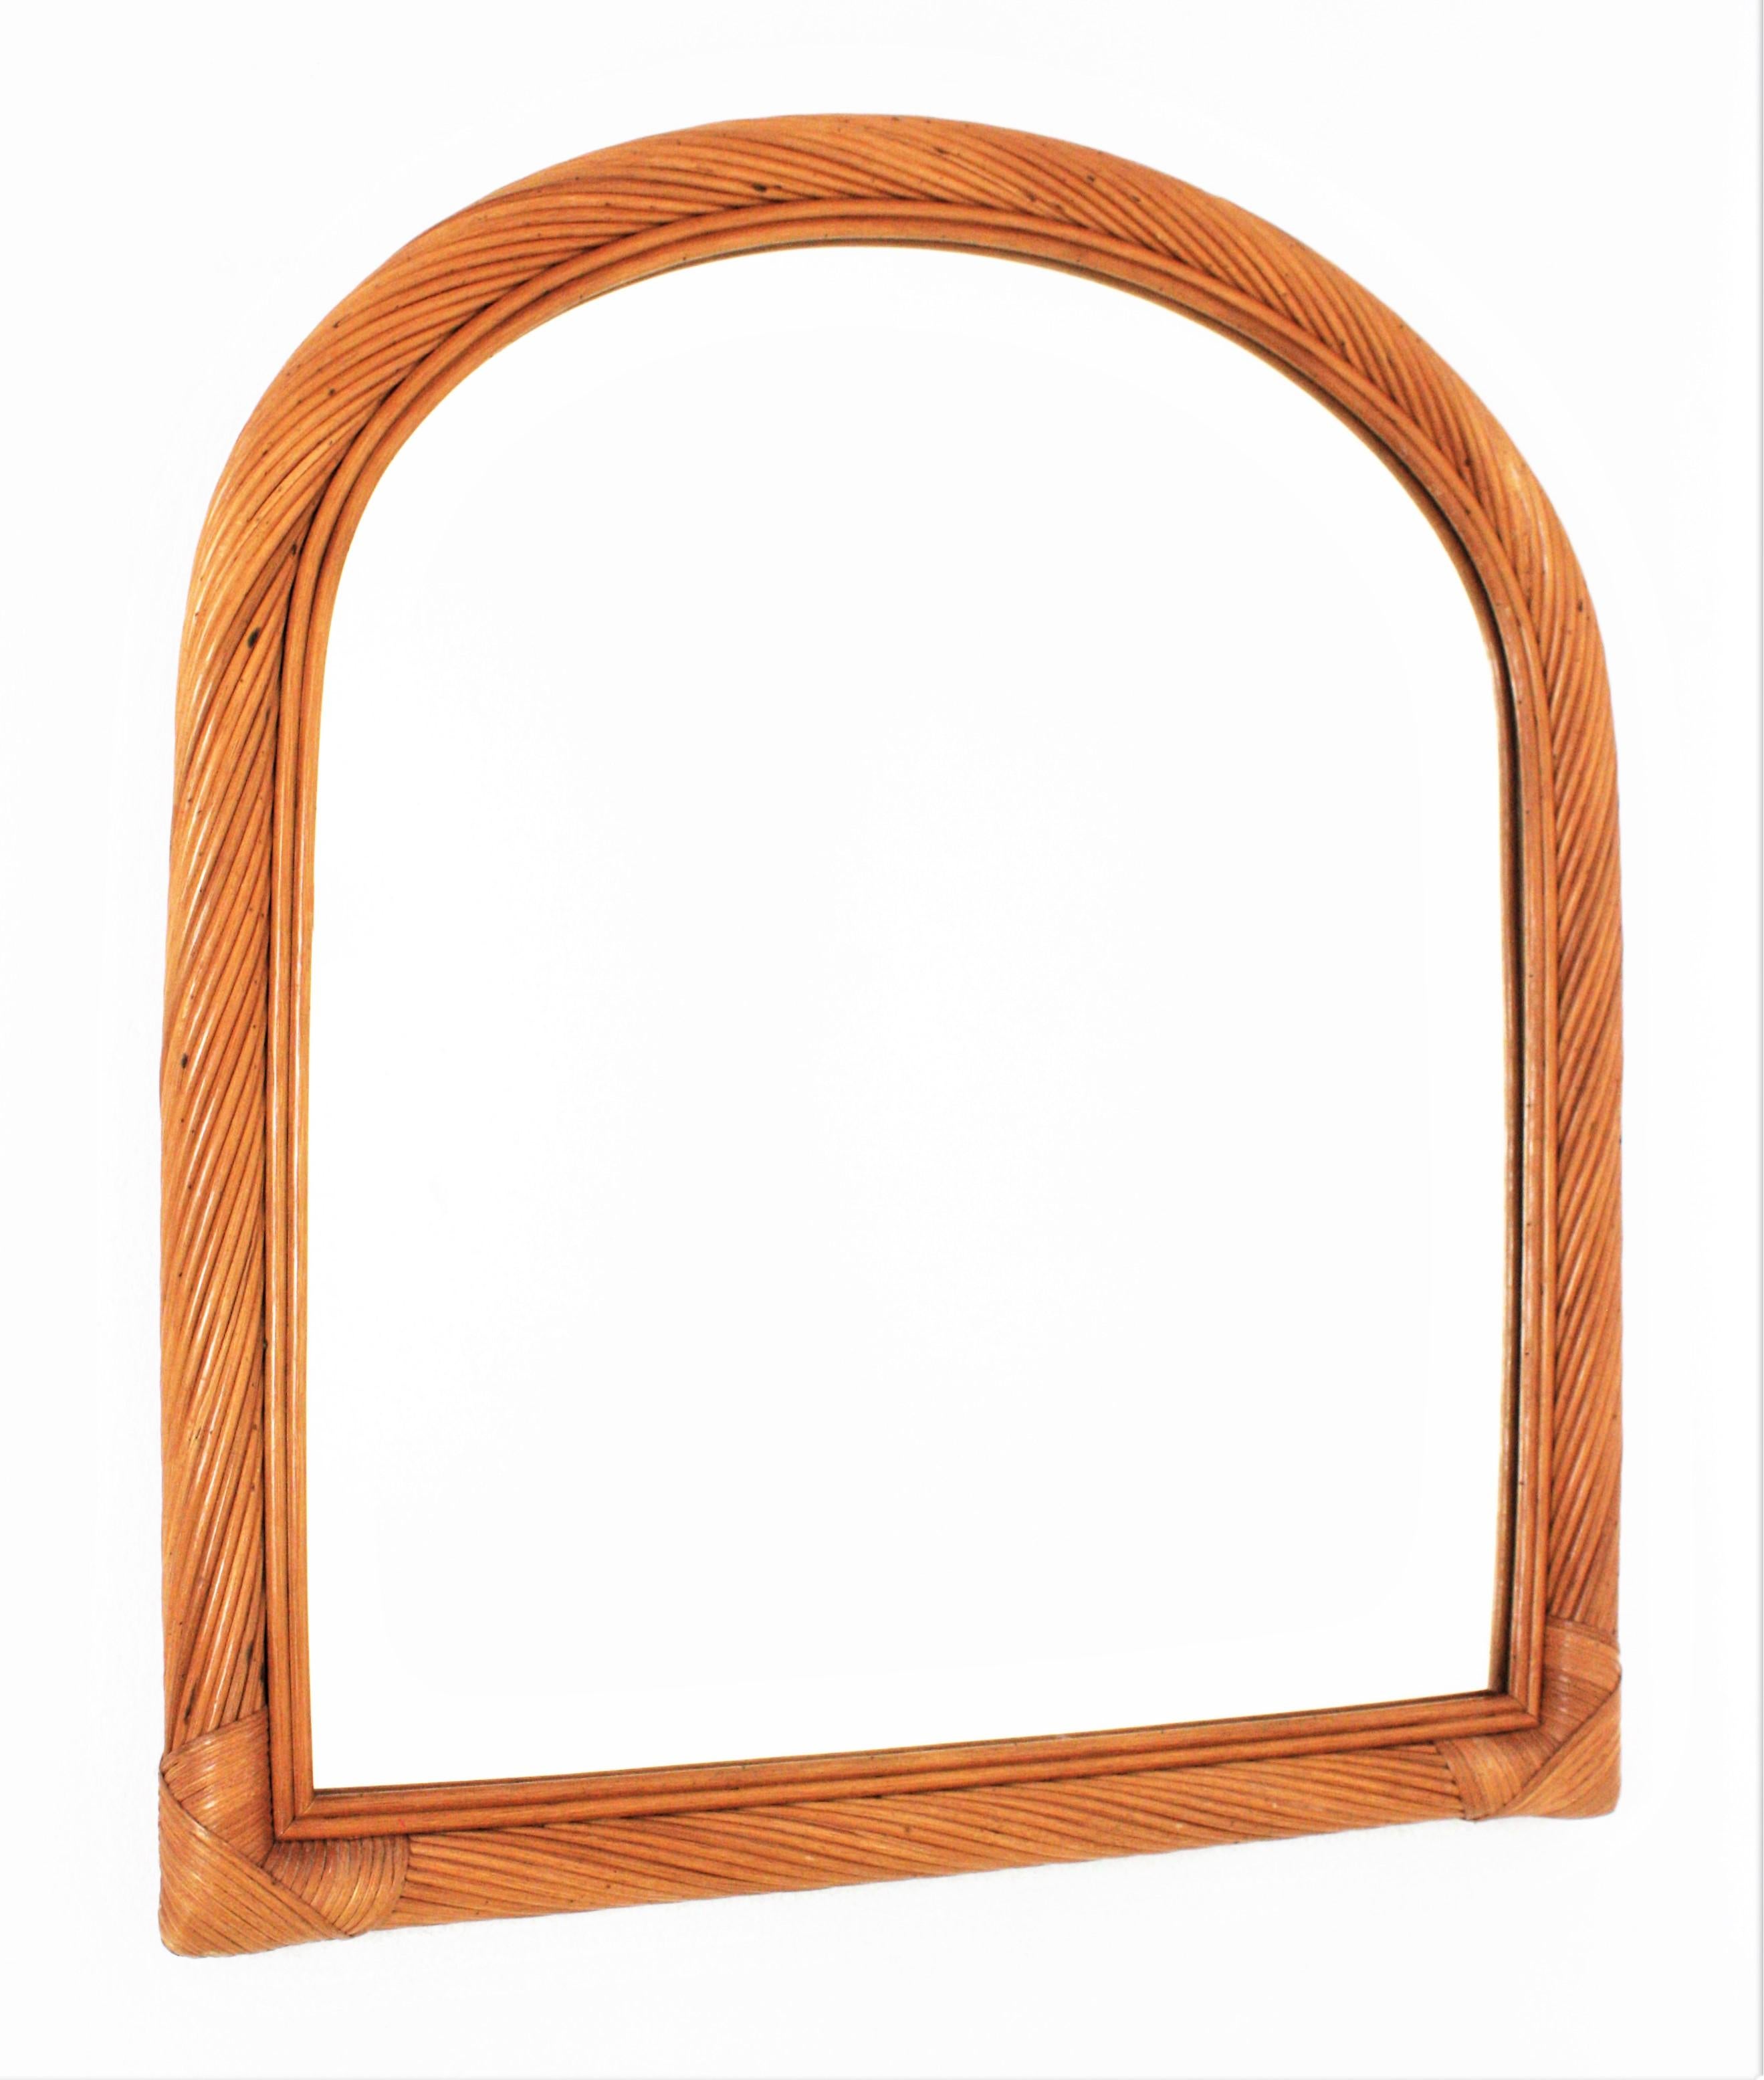 Eye-caching Organic Modern handcrafted in rattan. Attributed to Vivai del Sud. Italy, 1960s.
This mirror features a finely executed frame with arched top made of 20 layers of rattan canes. The layers of rattan are displayed in twisting disposition